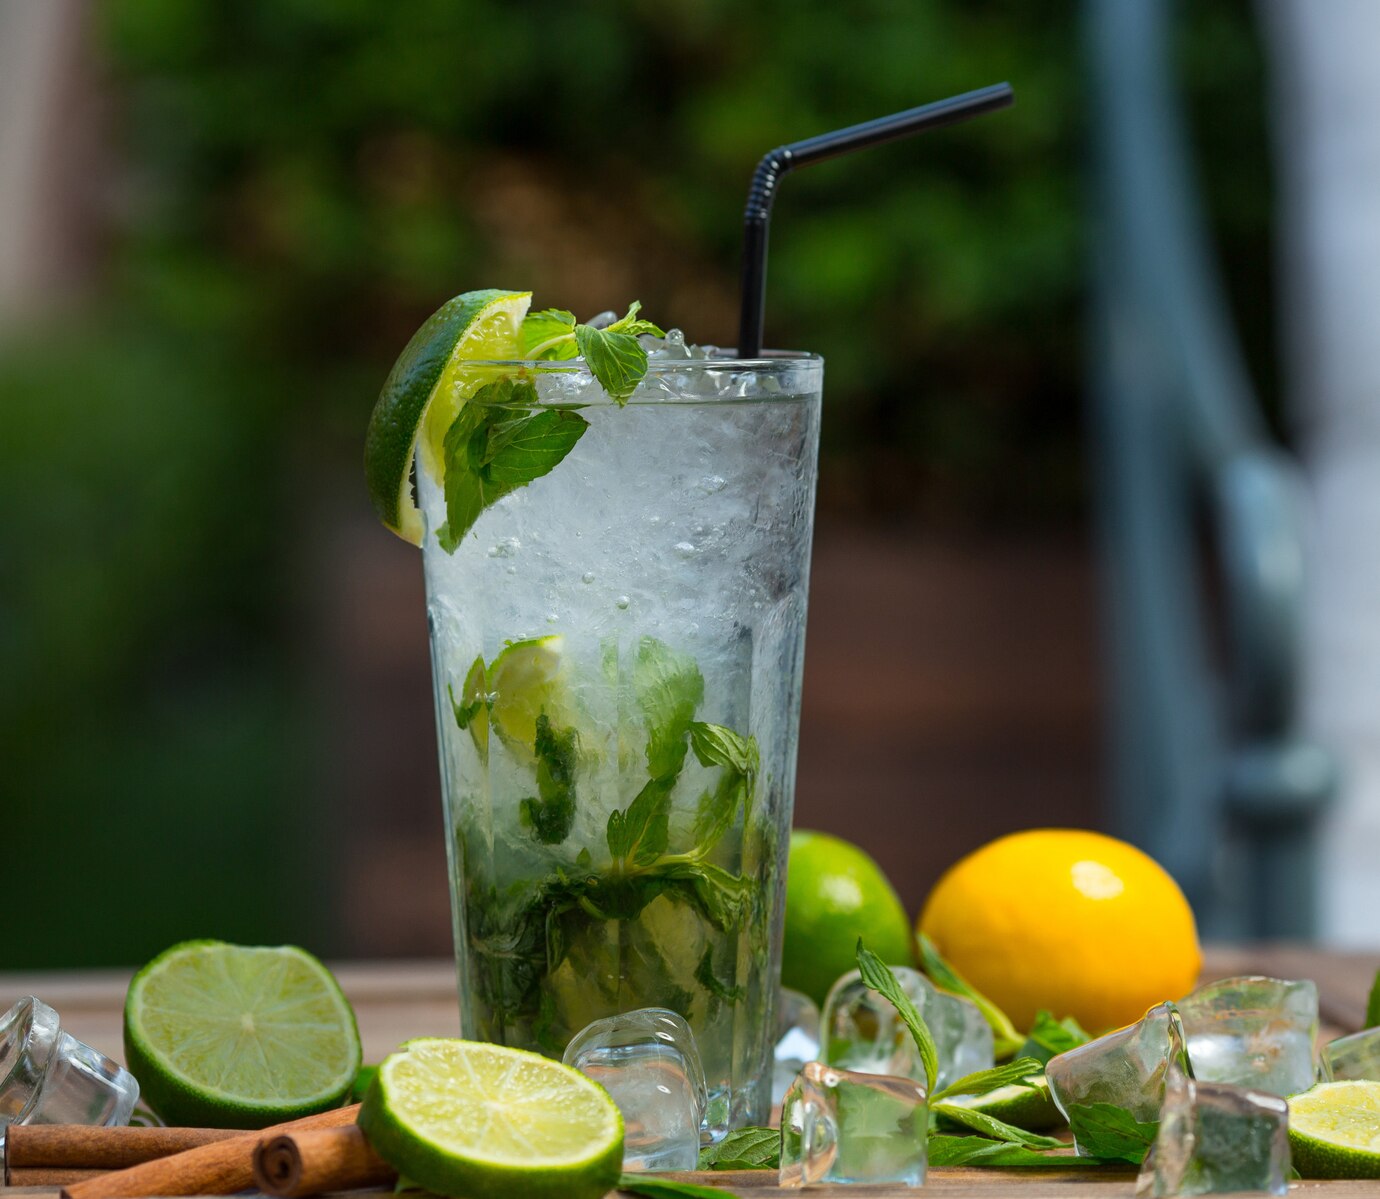 mojito-cocktail-glass-with-ice-pieces-fresh-mint-leaves-and-lime-slices-with-tube_114579-1447.jpg